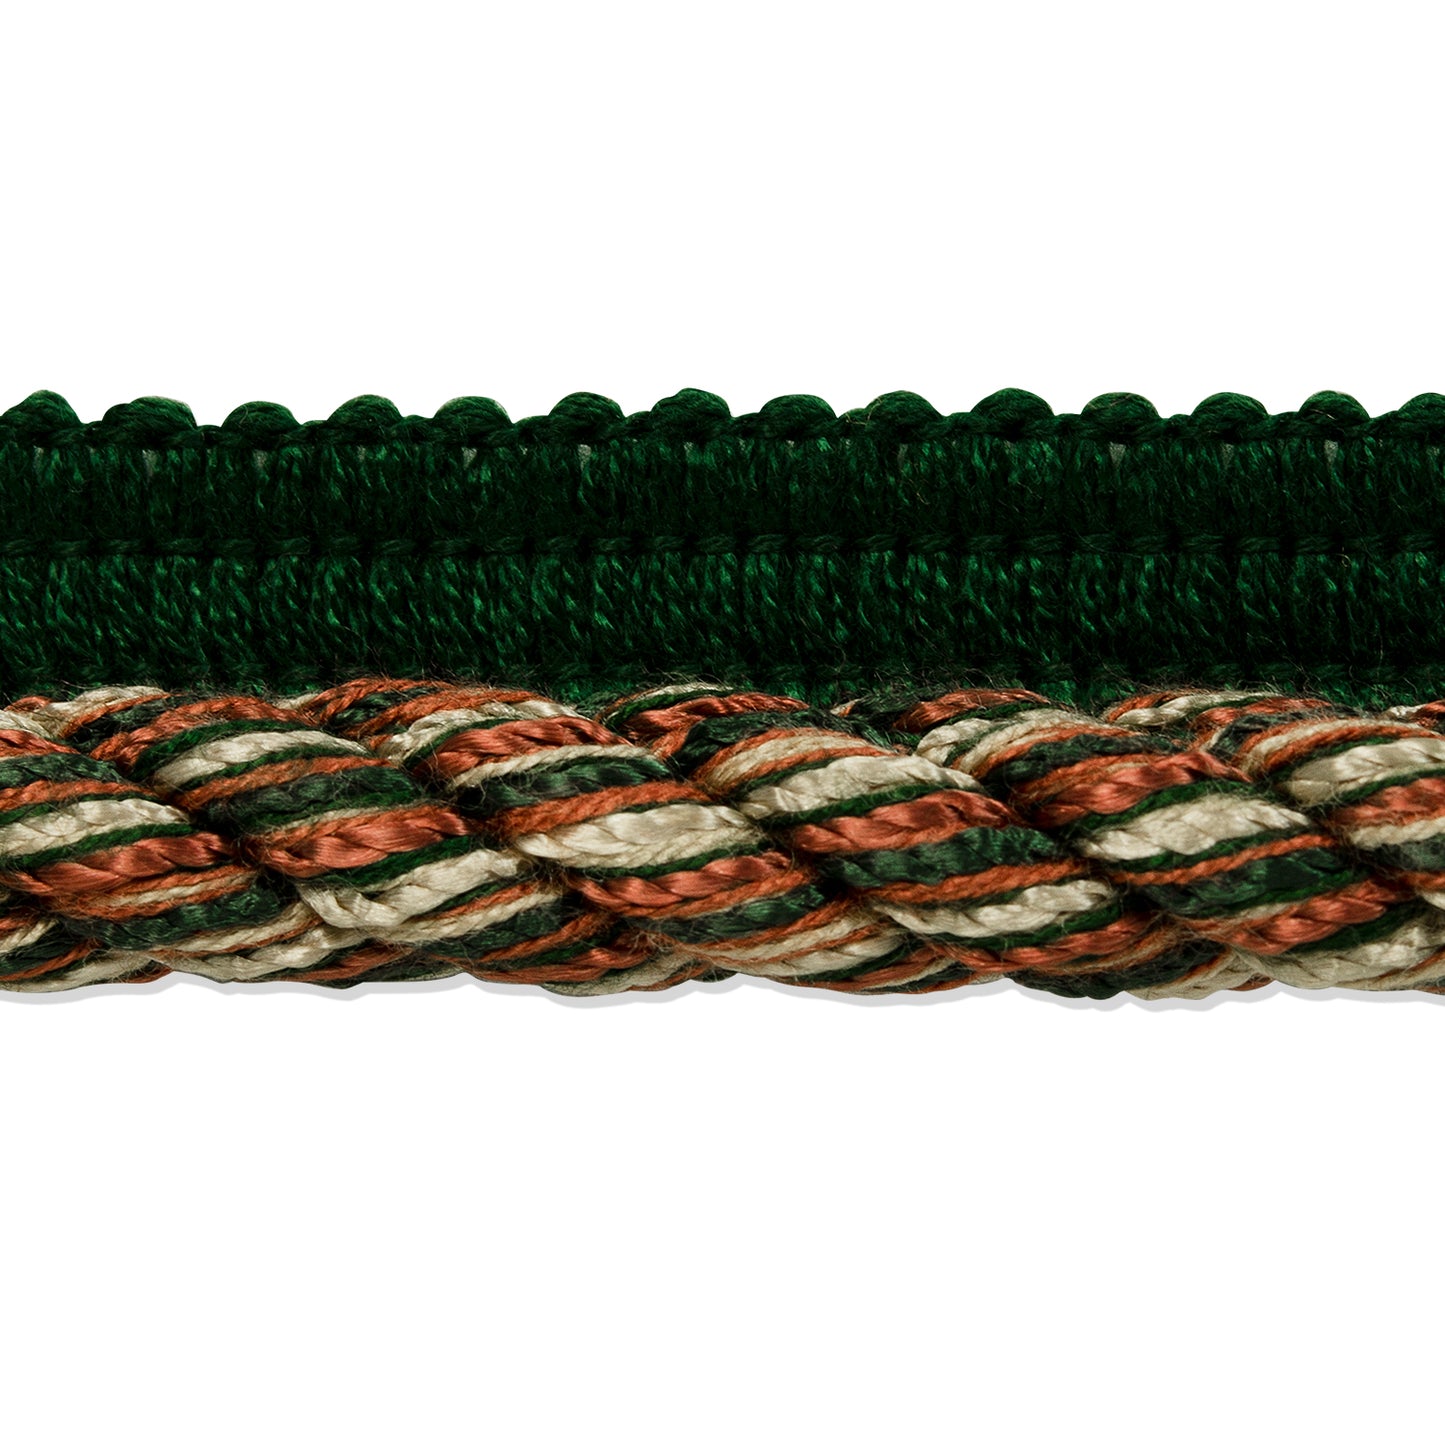 Conso 3/8" Twisted Lip Cord Trim (Sold by the Yard)